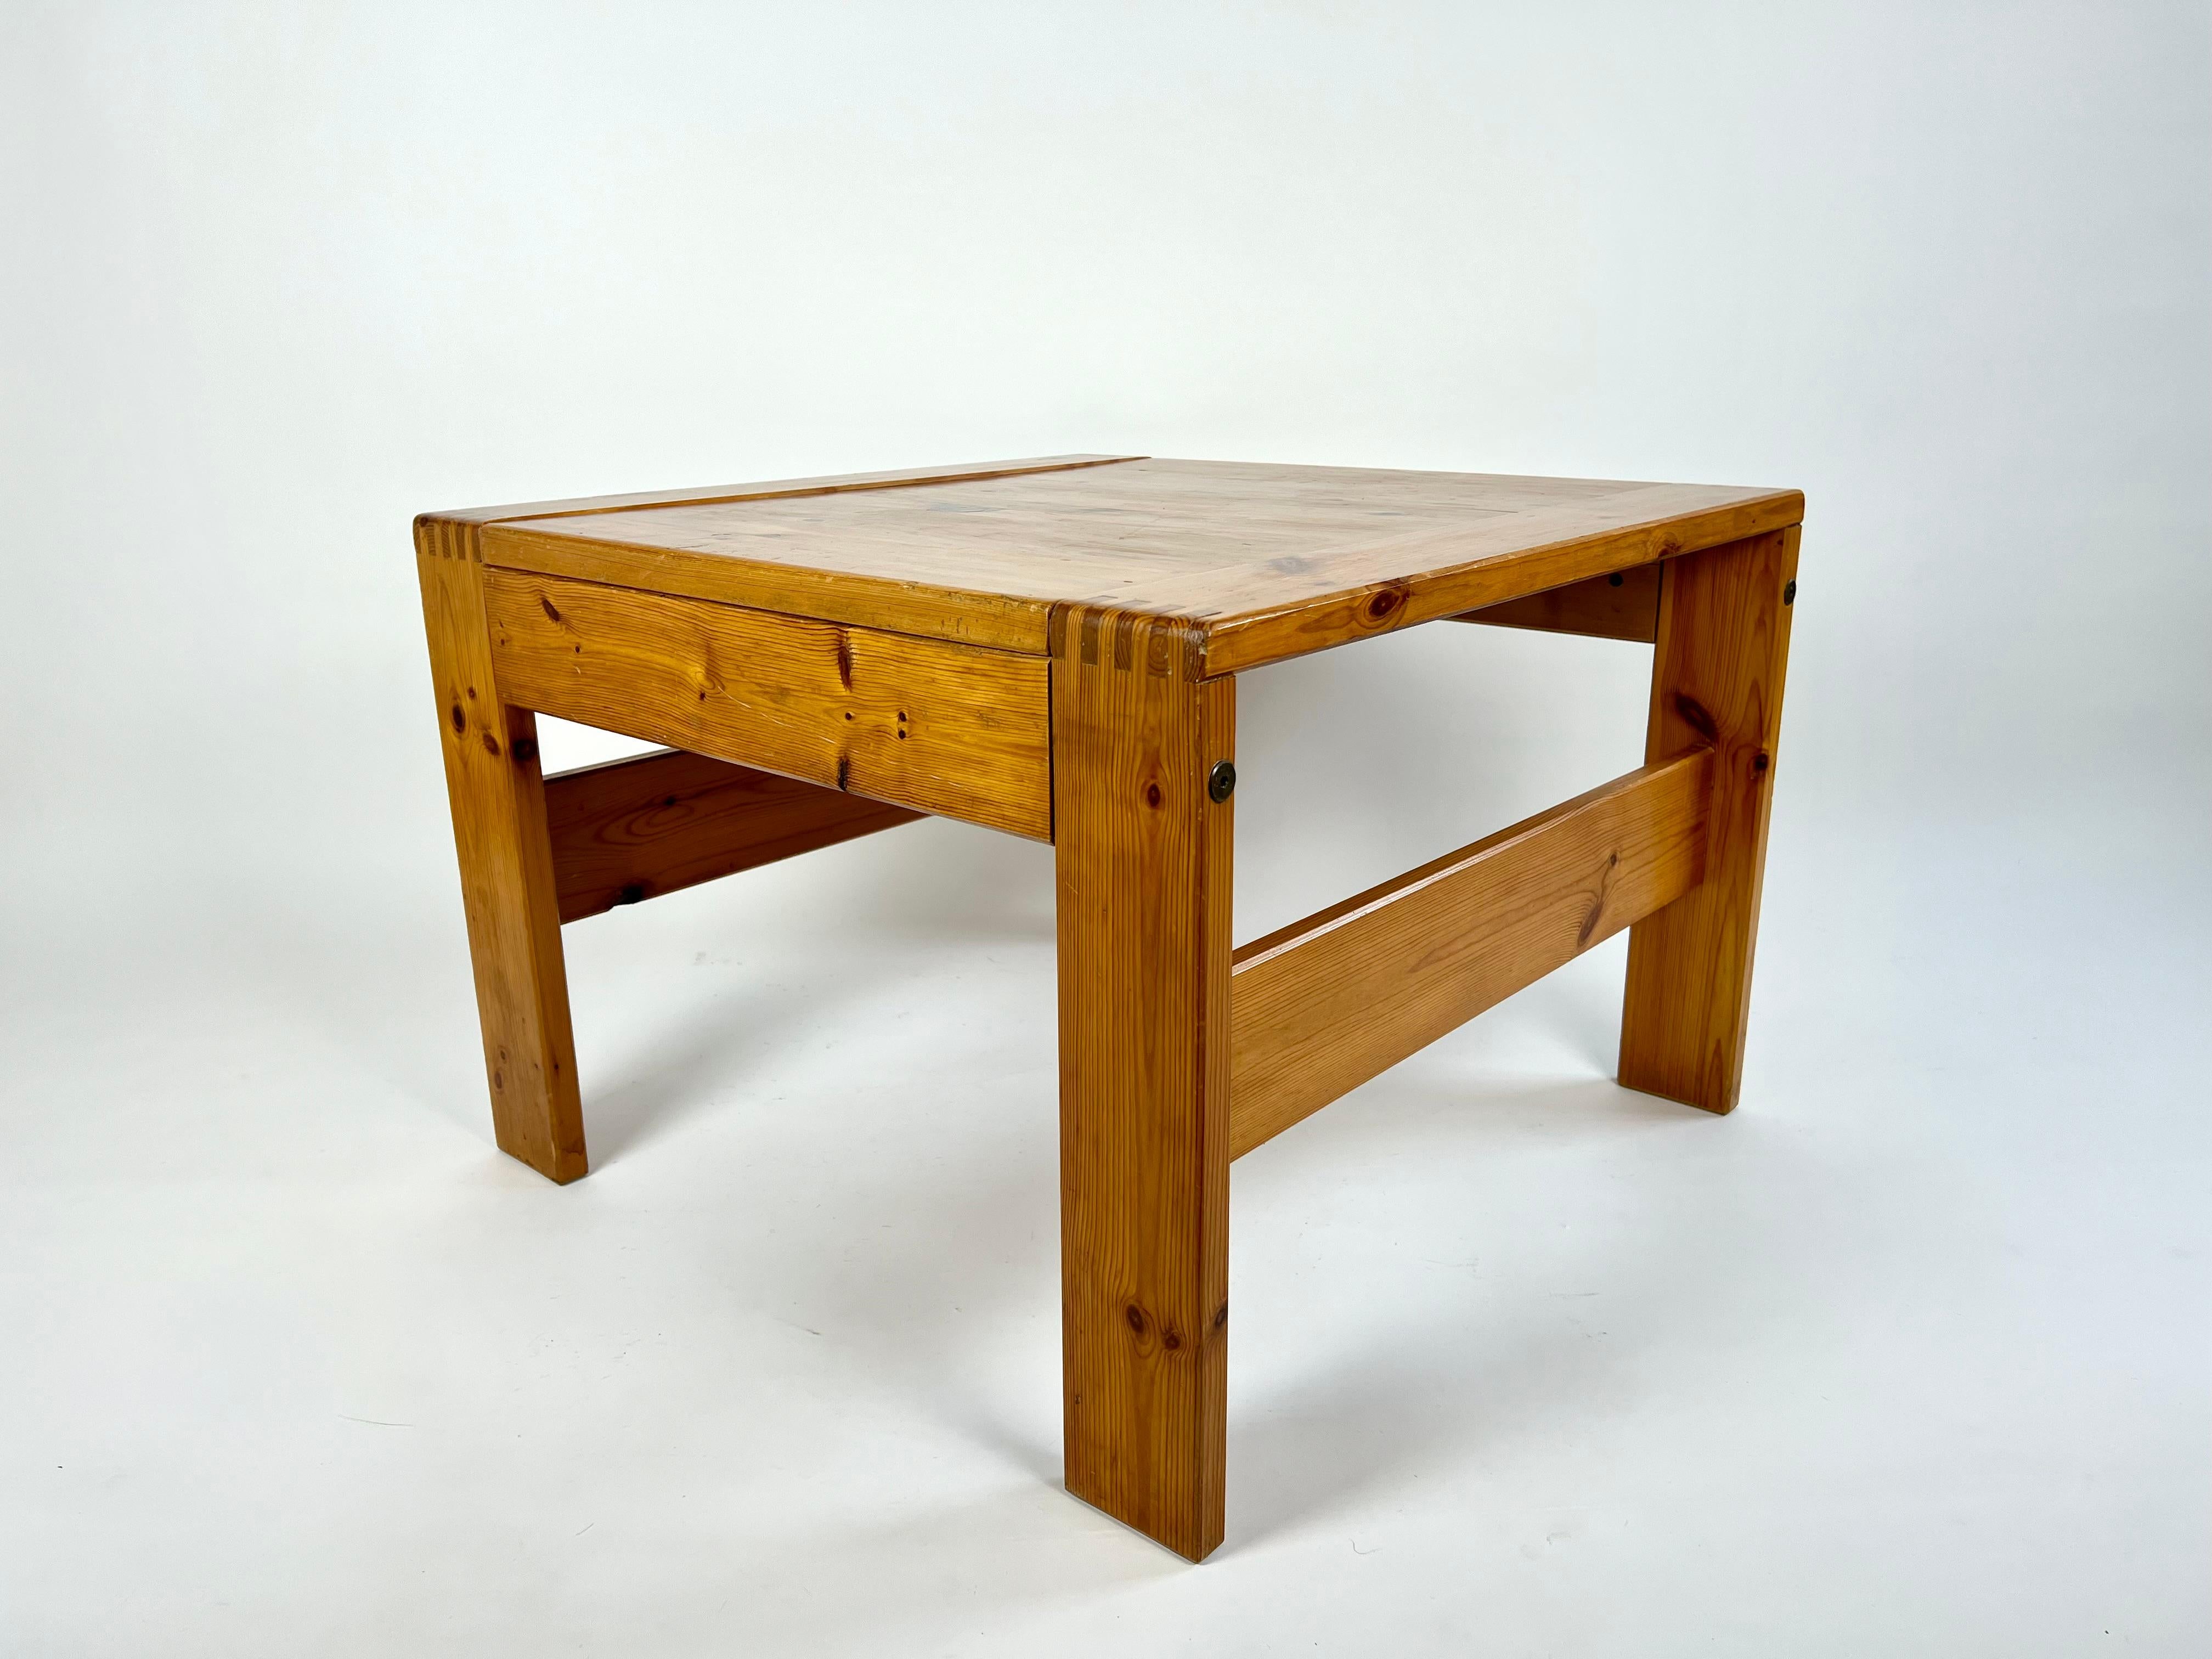 Vintage square coffee table in solid pine from the 70s-80s, sourced from France.

Great wood tone and nice finger joint detailing. The table is in an alpine style  with a clear nod to designs for Les Arcs by Charlotte Perriand.

Well built, solid